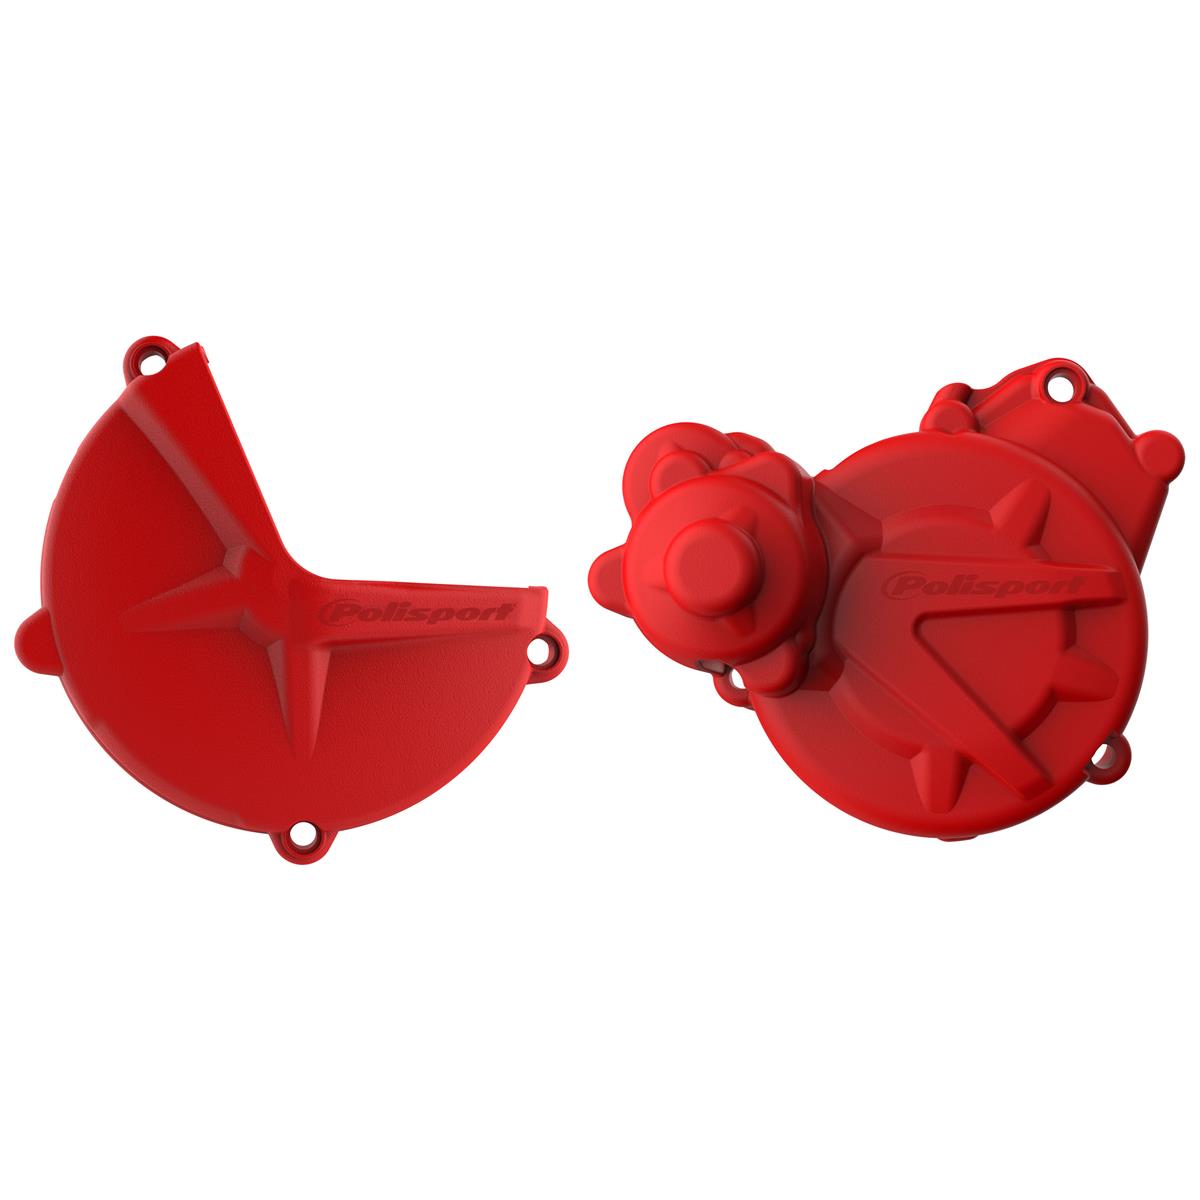 Polisport Clutch/Ignition Cover Protection  Gas Gas EC 250/300 17-20, Red